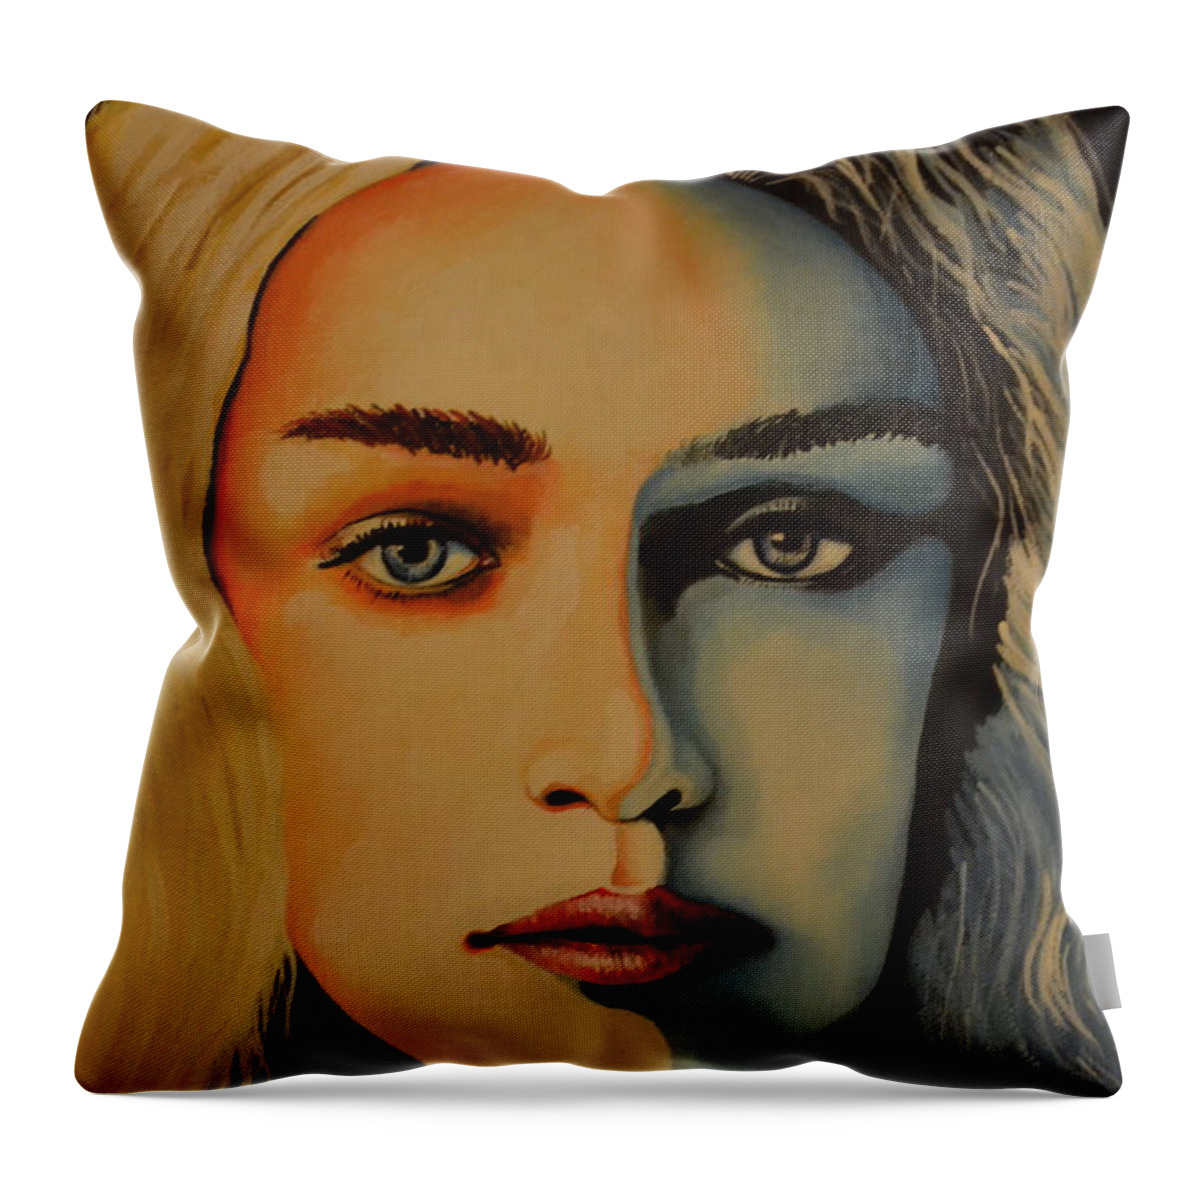 This Is A Painting Of Khalessi From The Series The Game Of Thrones. Her Face Is Painted In Two Different Colors. The Blue Represents Her Cold Side And The Bright Colors Her Caring Side. Throw Pillow featuring the painting Khaleesi Game of Thrones by Martin Schmidt